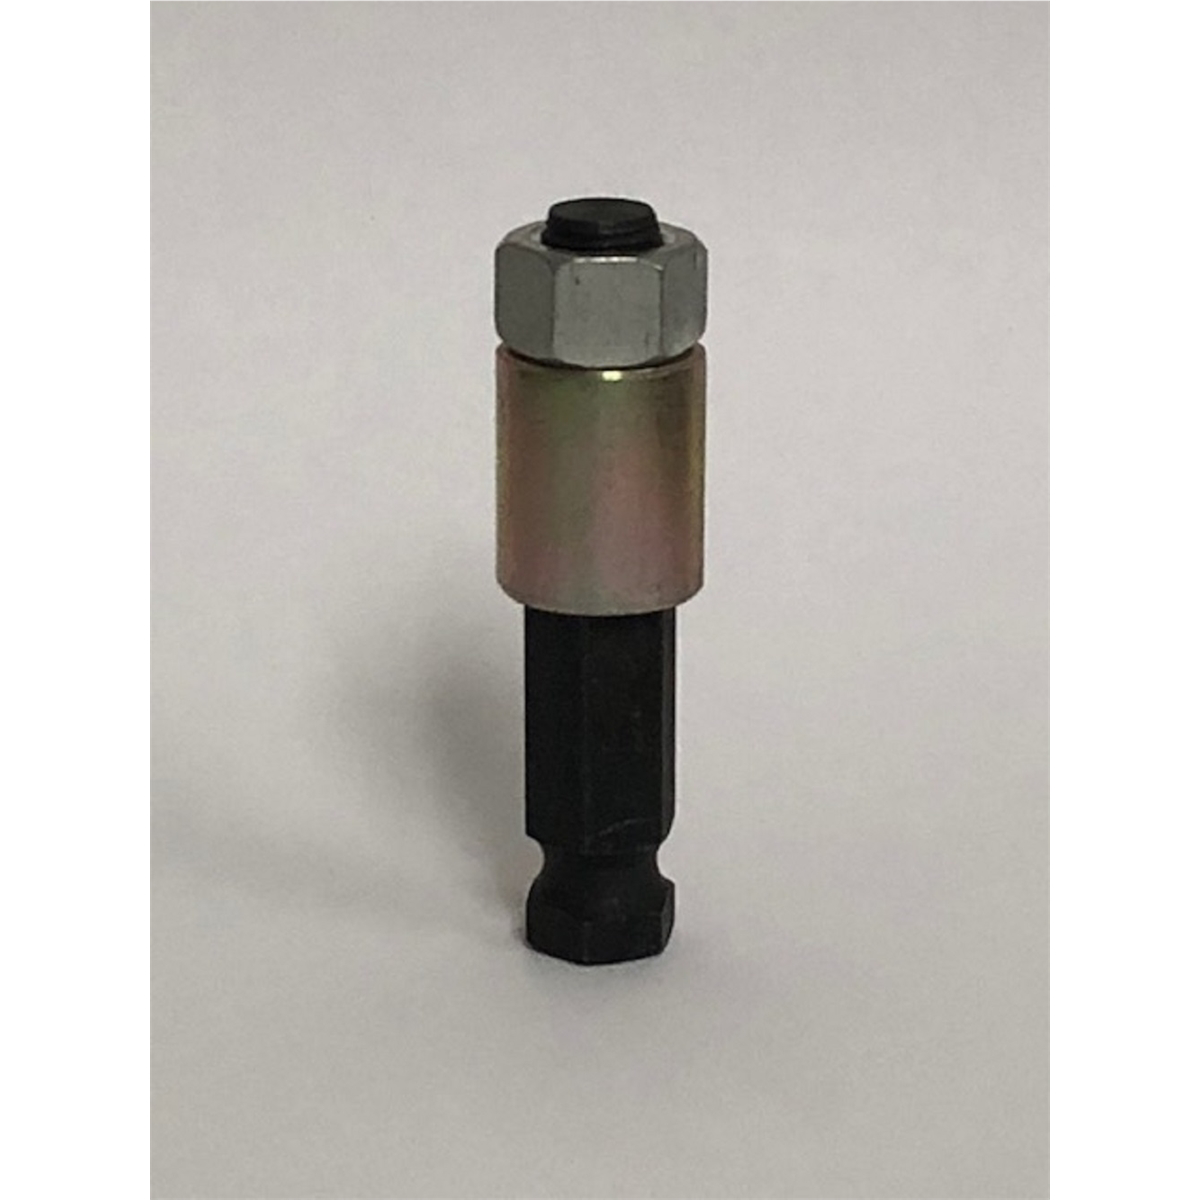 Quick Change Adapter With Spacer 1" X 3/8" Thread...